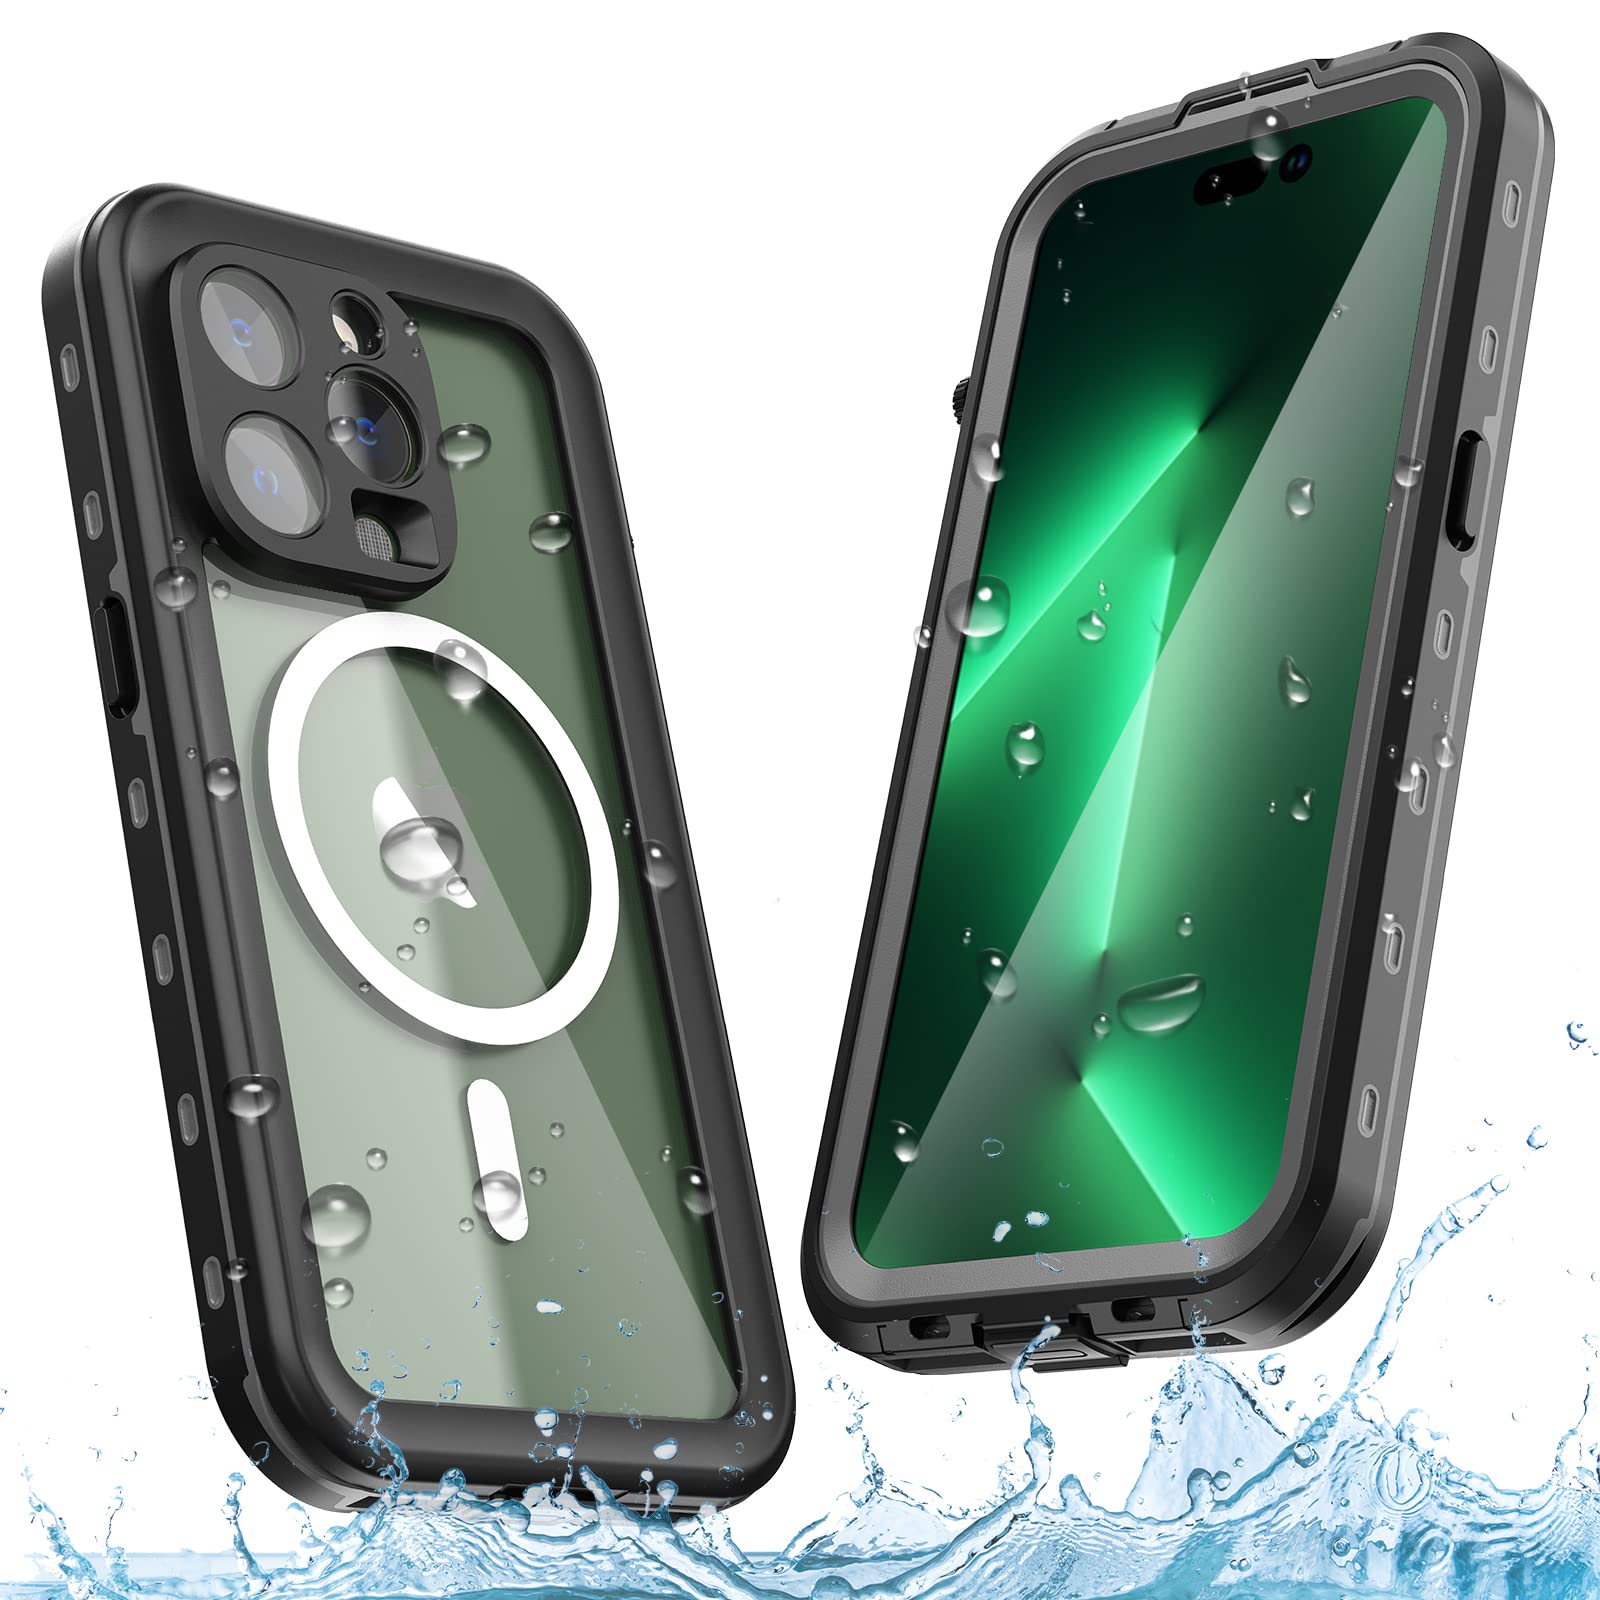 Navigating Your IPhone Inside A Waterproof Case